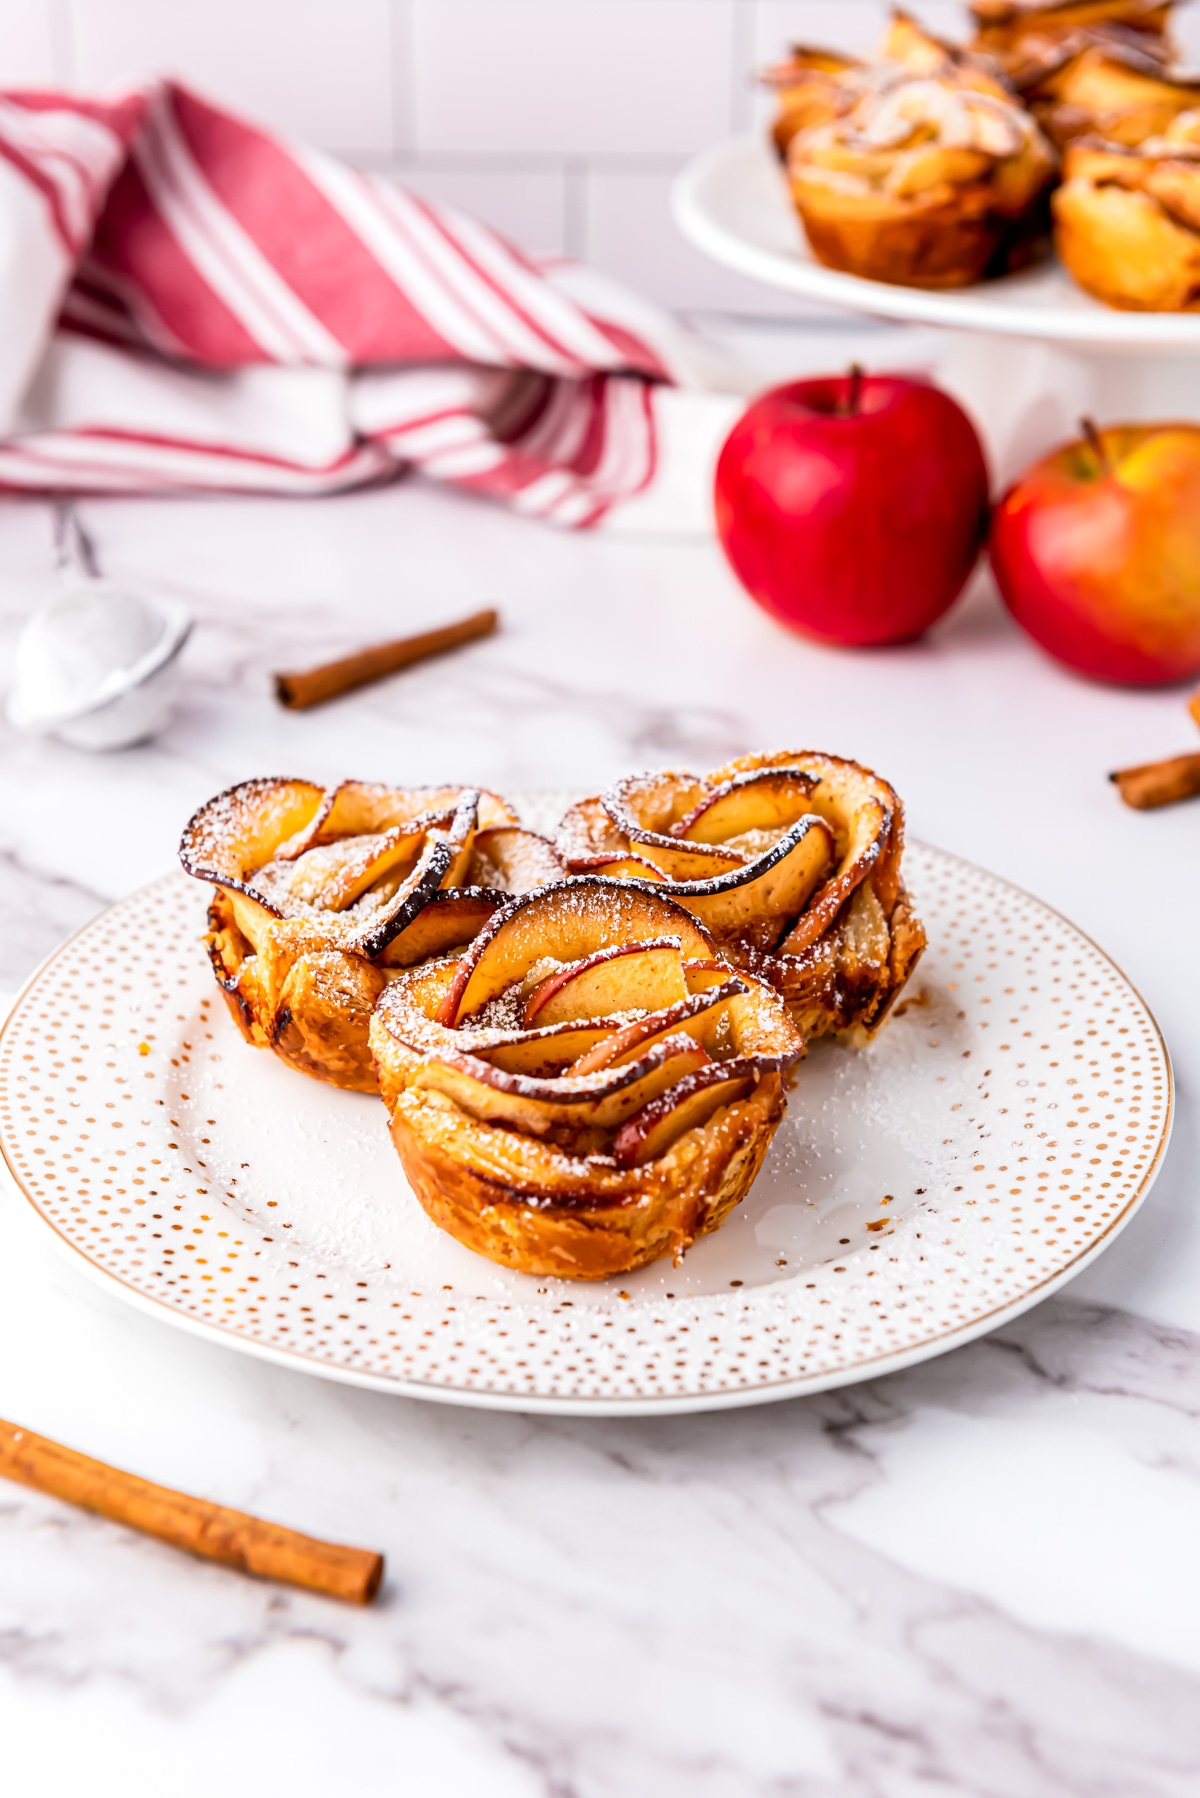 Apple rose pastries on plate.